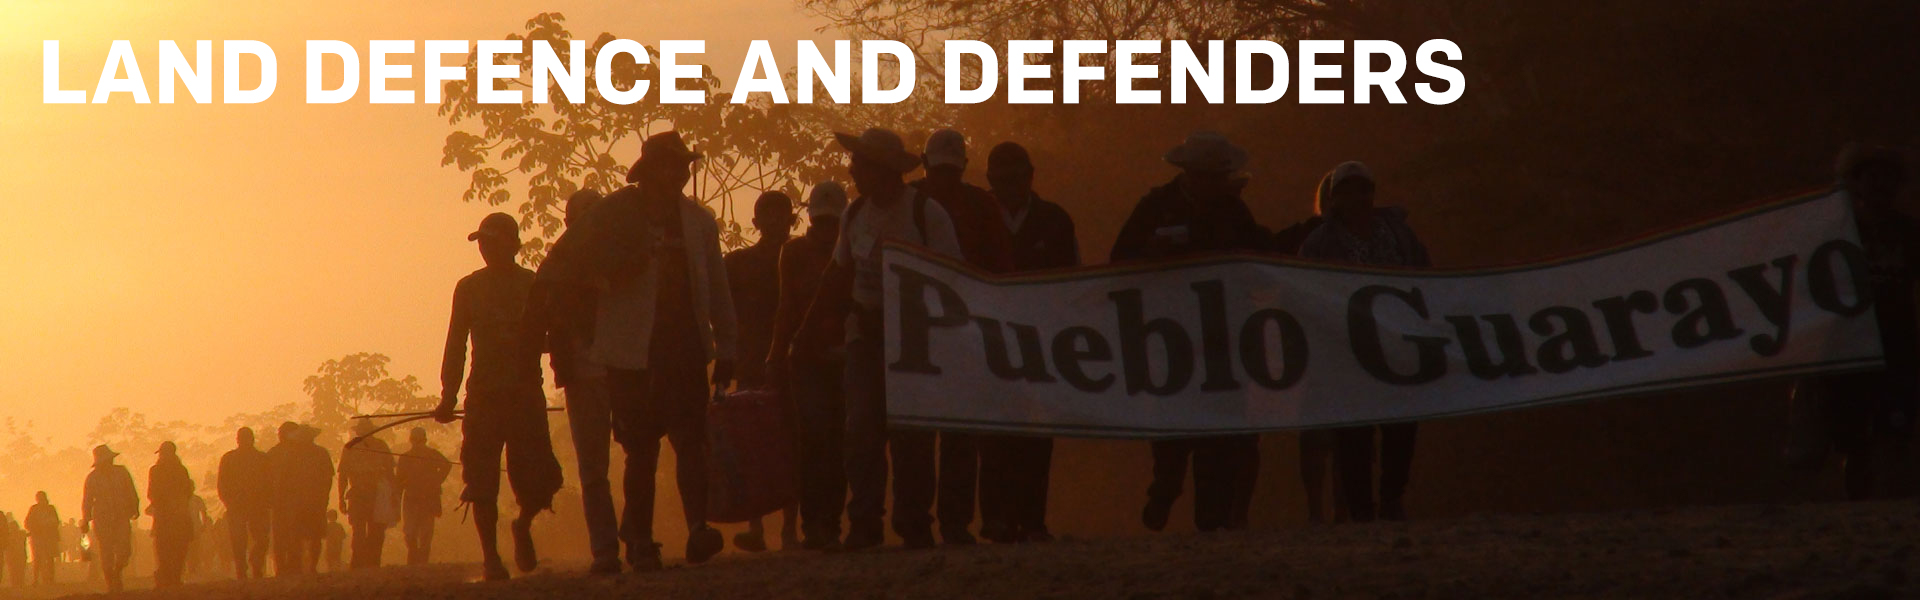 Land Defence and Defenders